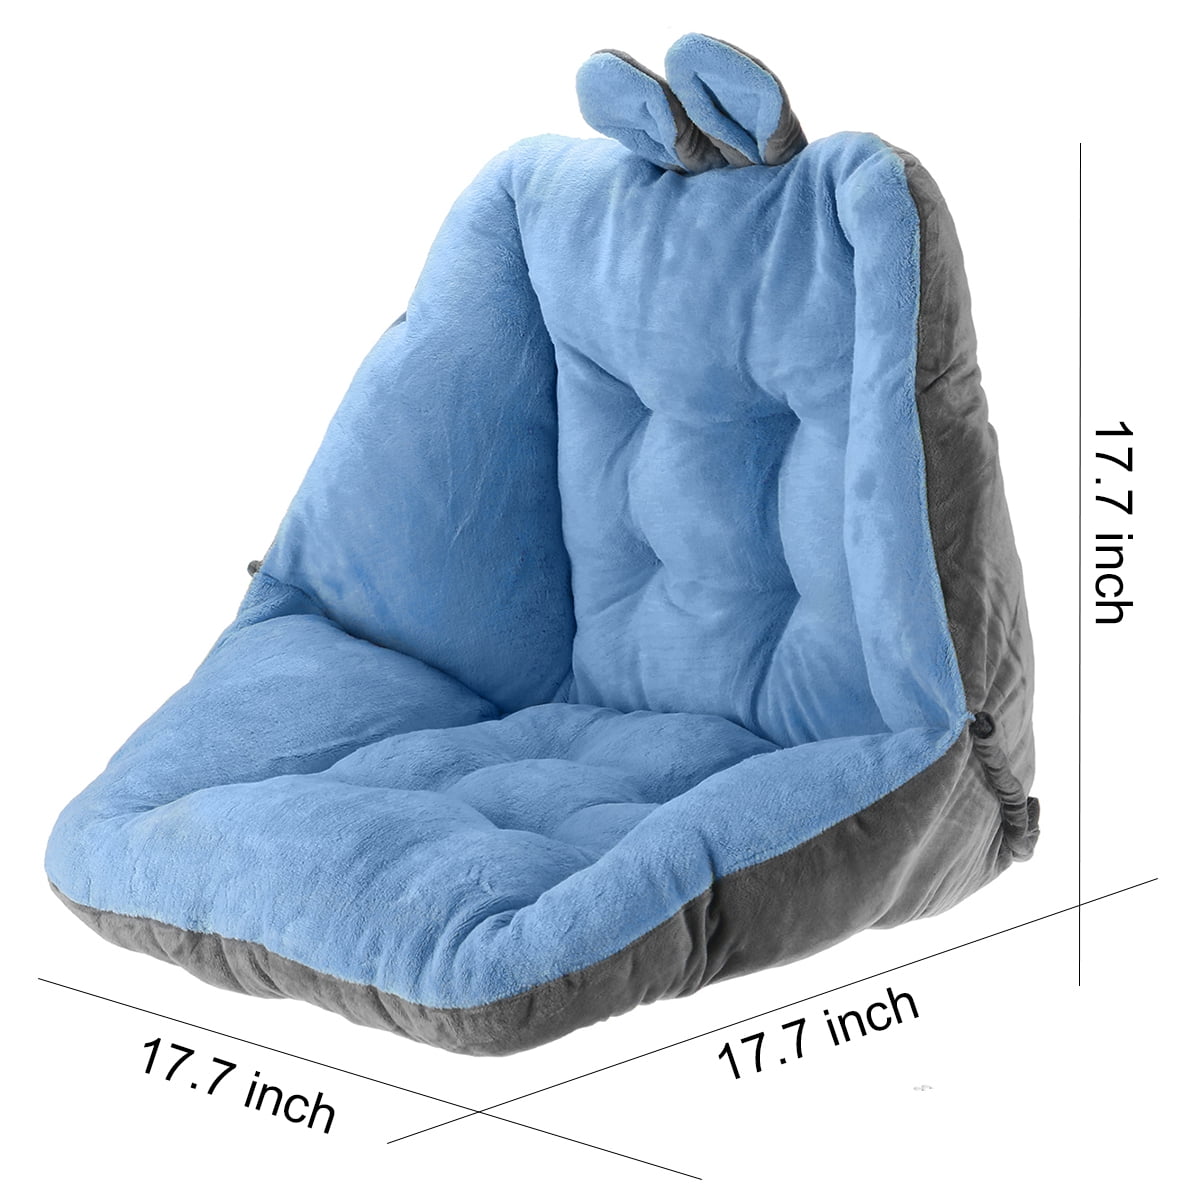 Comfortable Semi-enclosed Single Seat Cushion Office Sciatica Conjoined  Waist Guard Shell Rabbit Ear Chair Cushion with Backrest